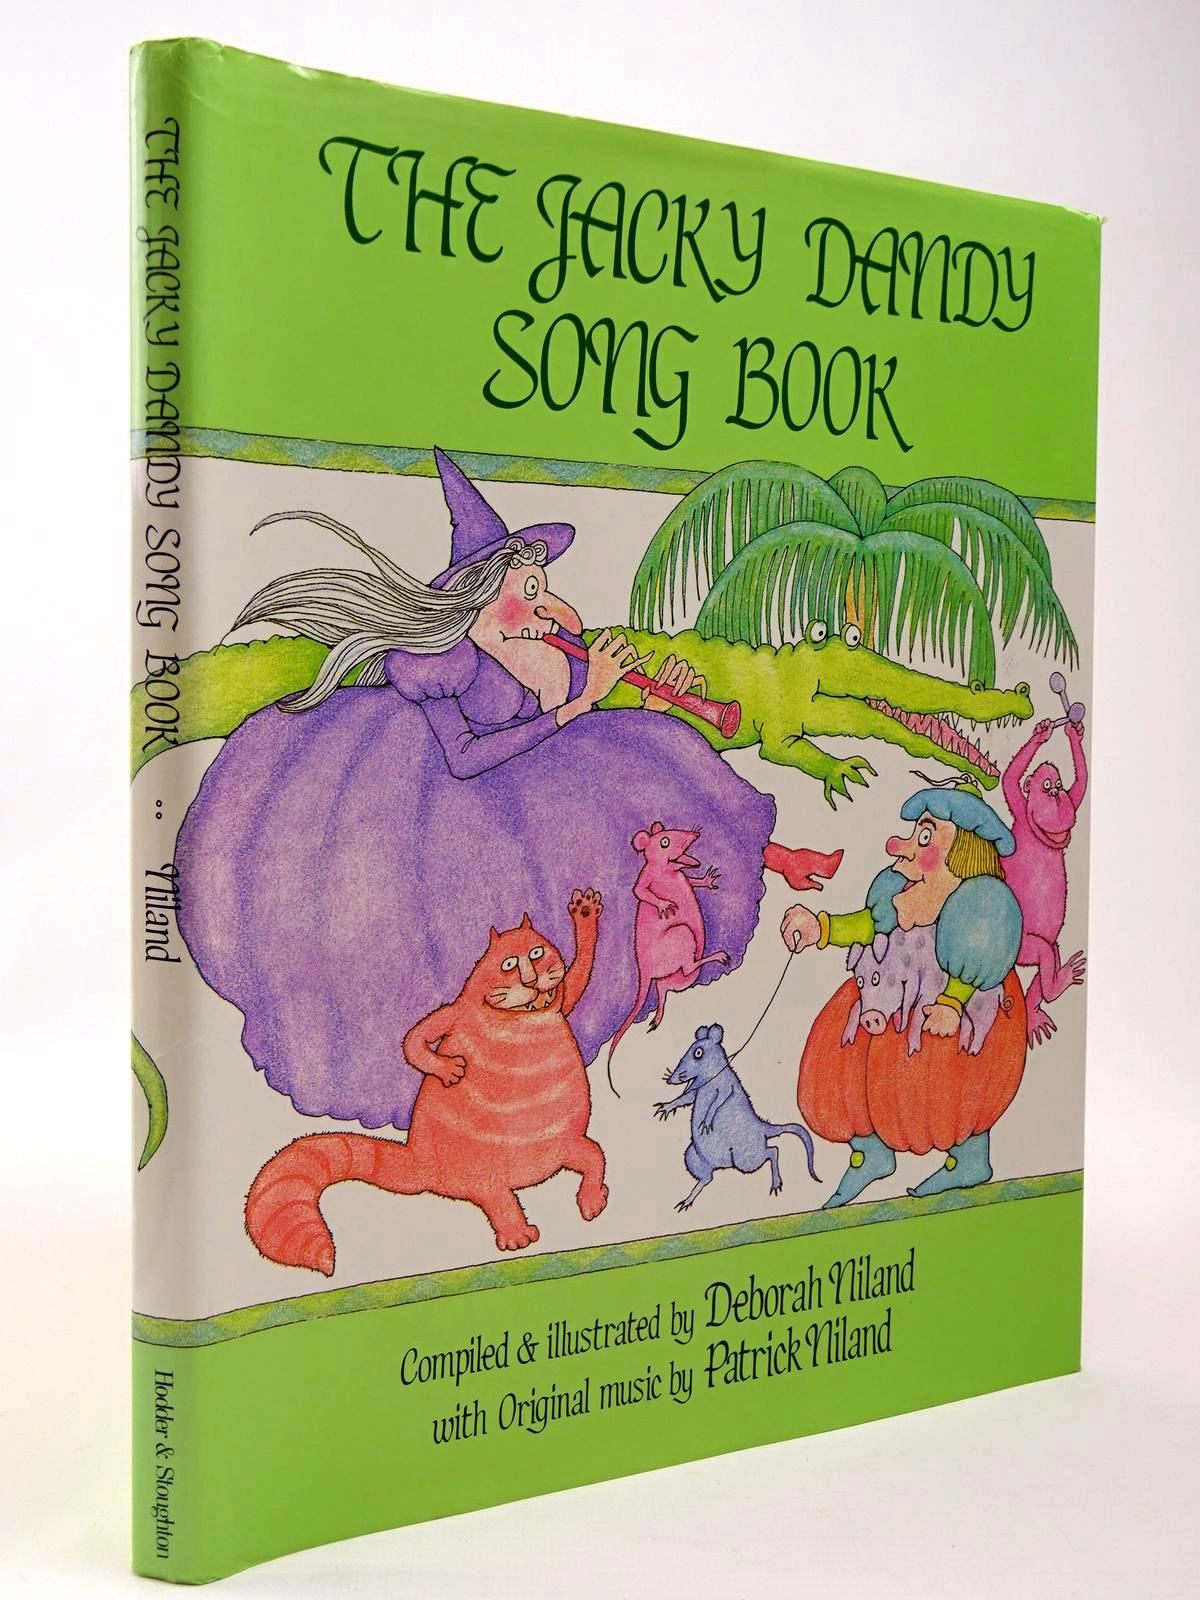 Photo of THE JACKY DANDY SONG BOOK written by Niland, Deborah illustrated by Niland, Deborah published by Hodder & Stoughton (STOCK CODE: 2129831)  for sale by Stella & Rose's Books